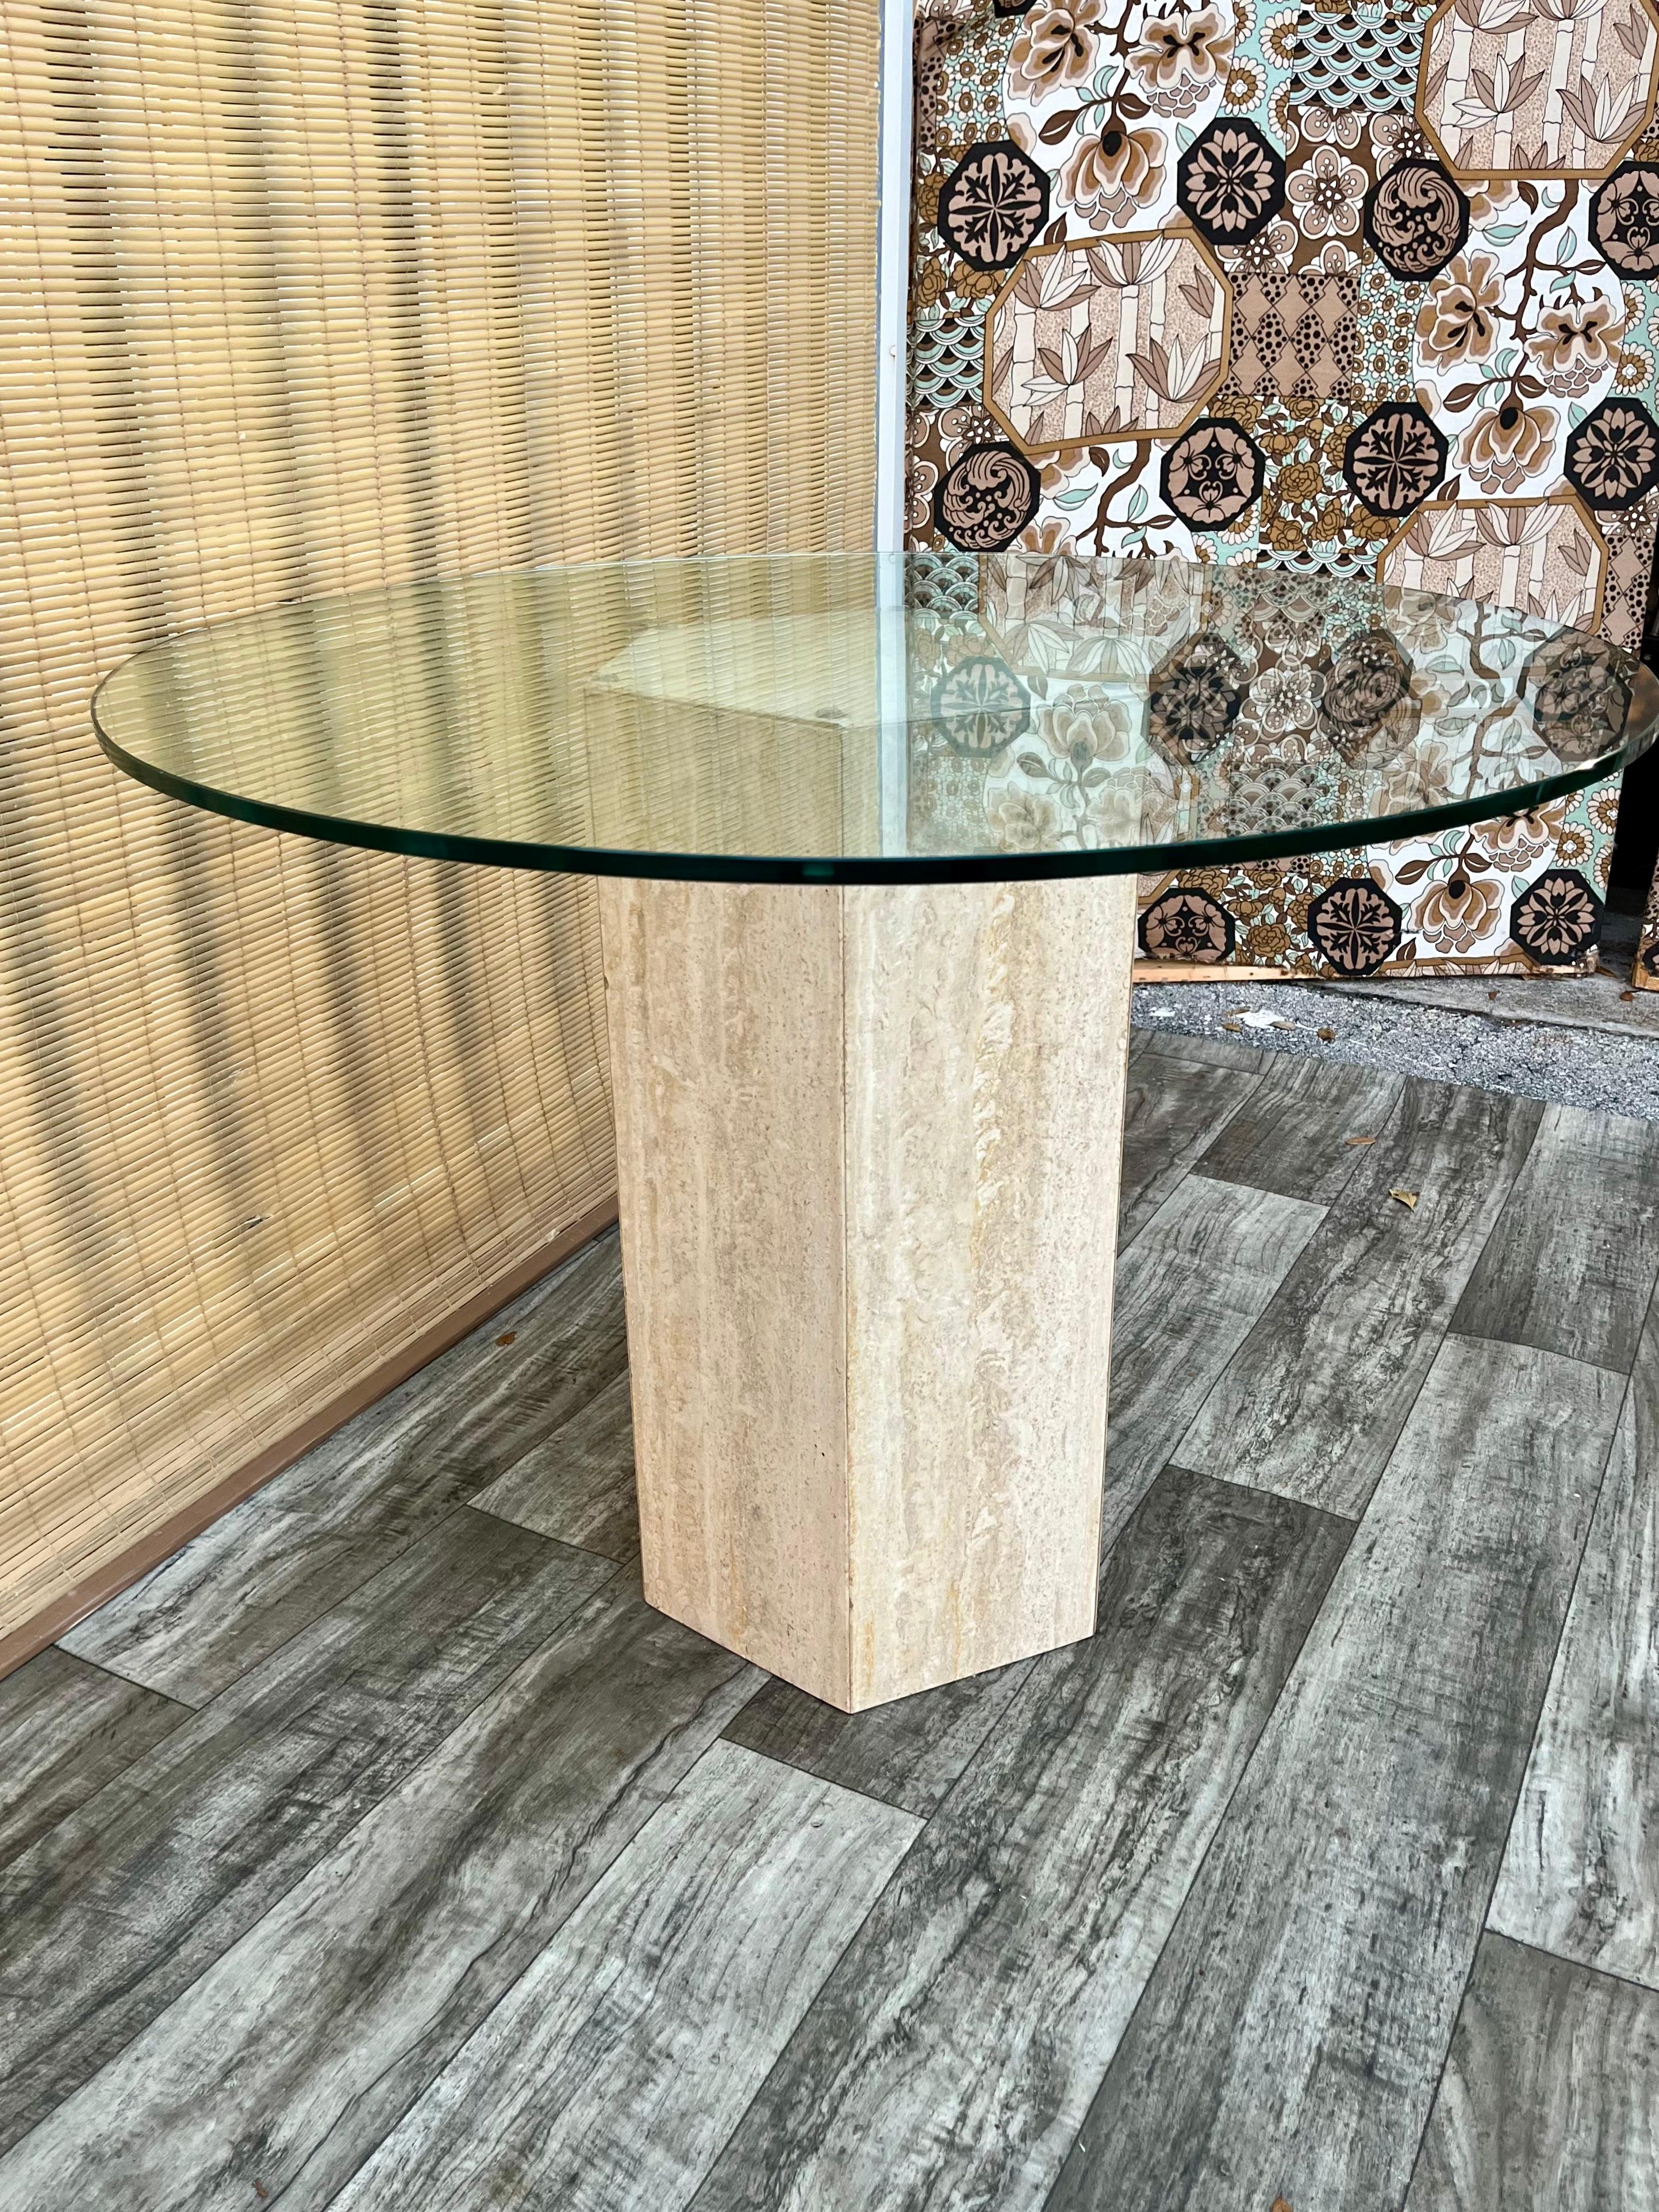 Vintage Postmodern Hexagon Travertine Pedestal Base Glass-Top Center/ Diner Table. Circa 1970s
Features a hexagon travertine base with beautiful stone veins pattern and a removable round glass top. 
Comfortable seats four guests. 
In excellent